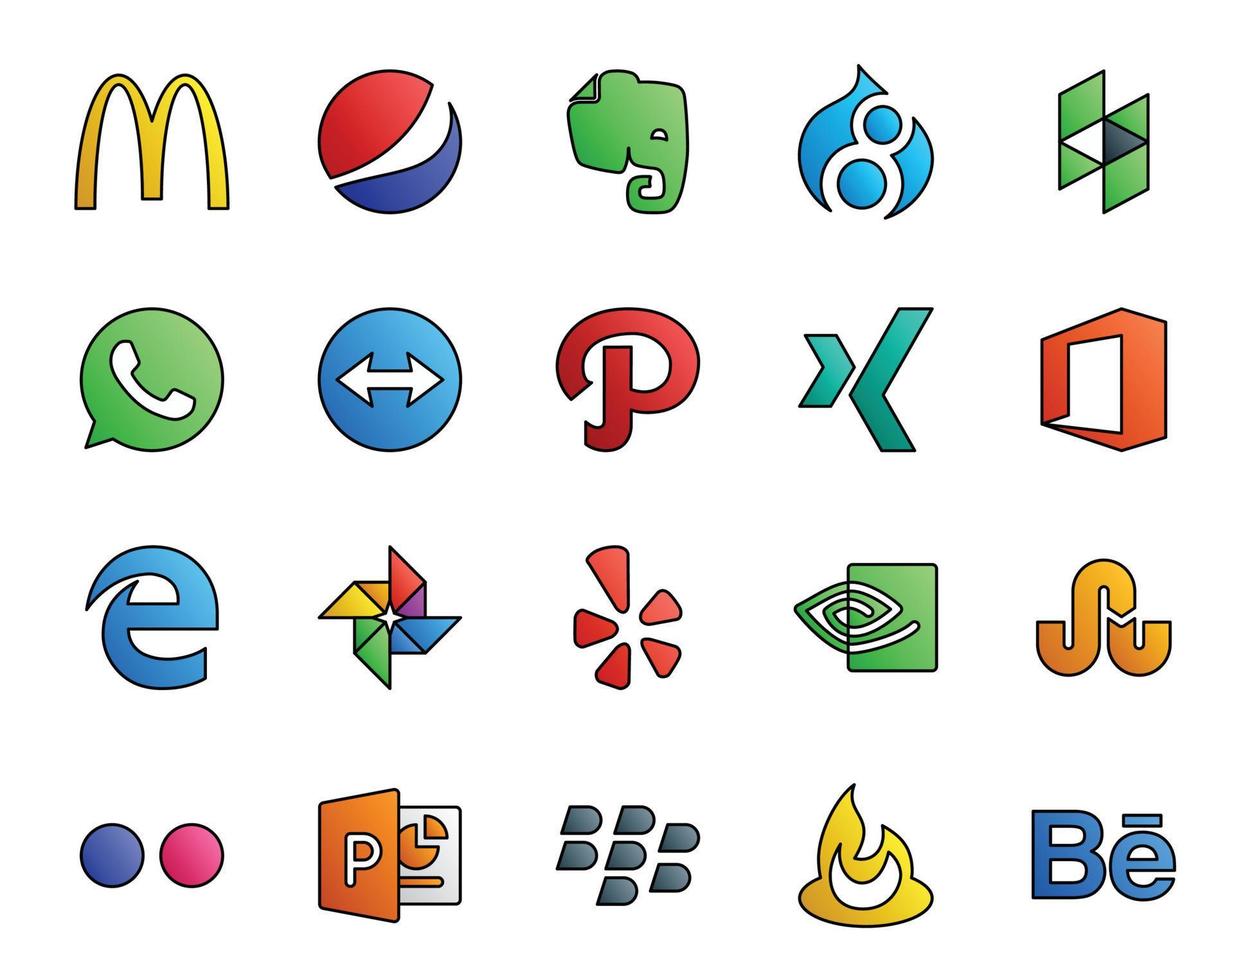 20 Social Media Icon Pack Including blackberry flickr xing stumbleupon yelp vector